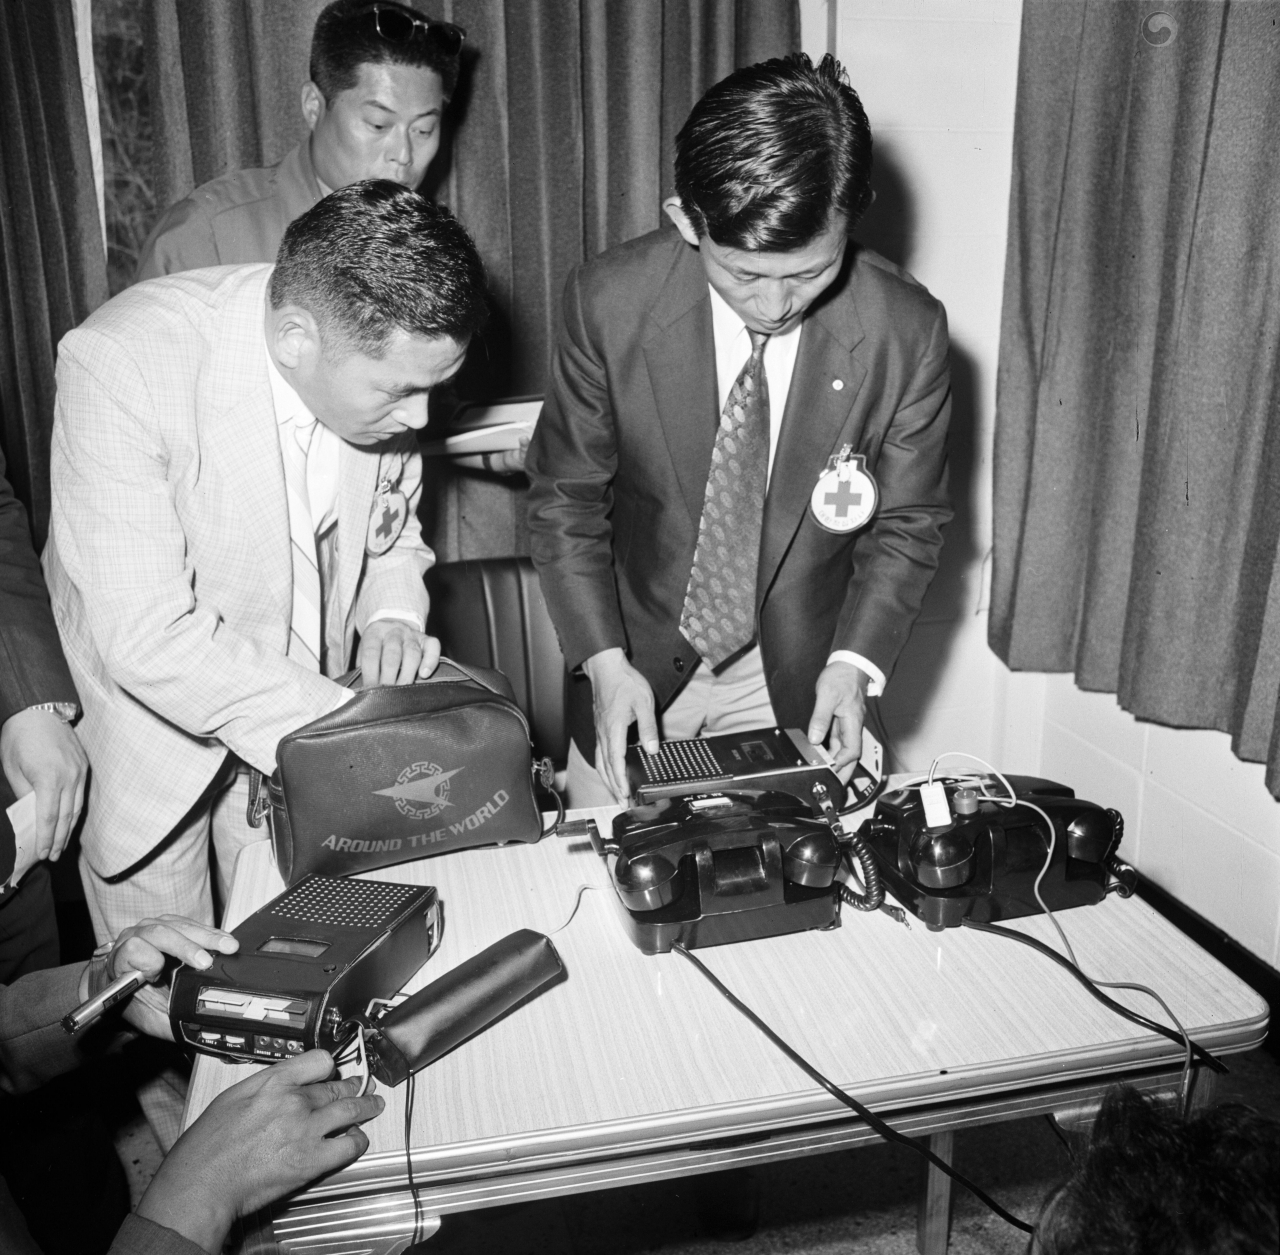 South Korean officials install a Seoul-Pyongyang hotline that directly connects the top leaders of the two governments, as part of the July 4, 1972 South-North Joint Statement. (National Archives of Korea)